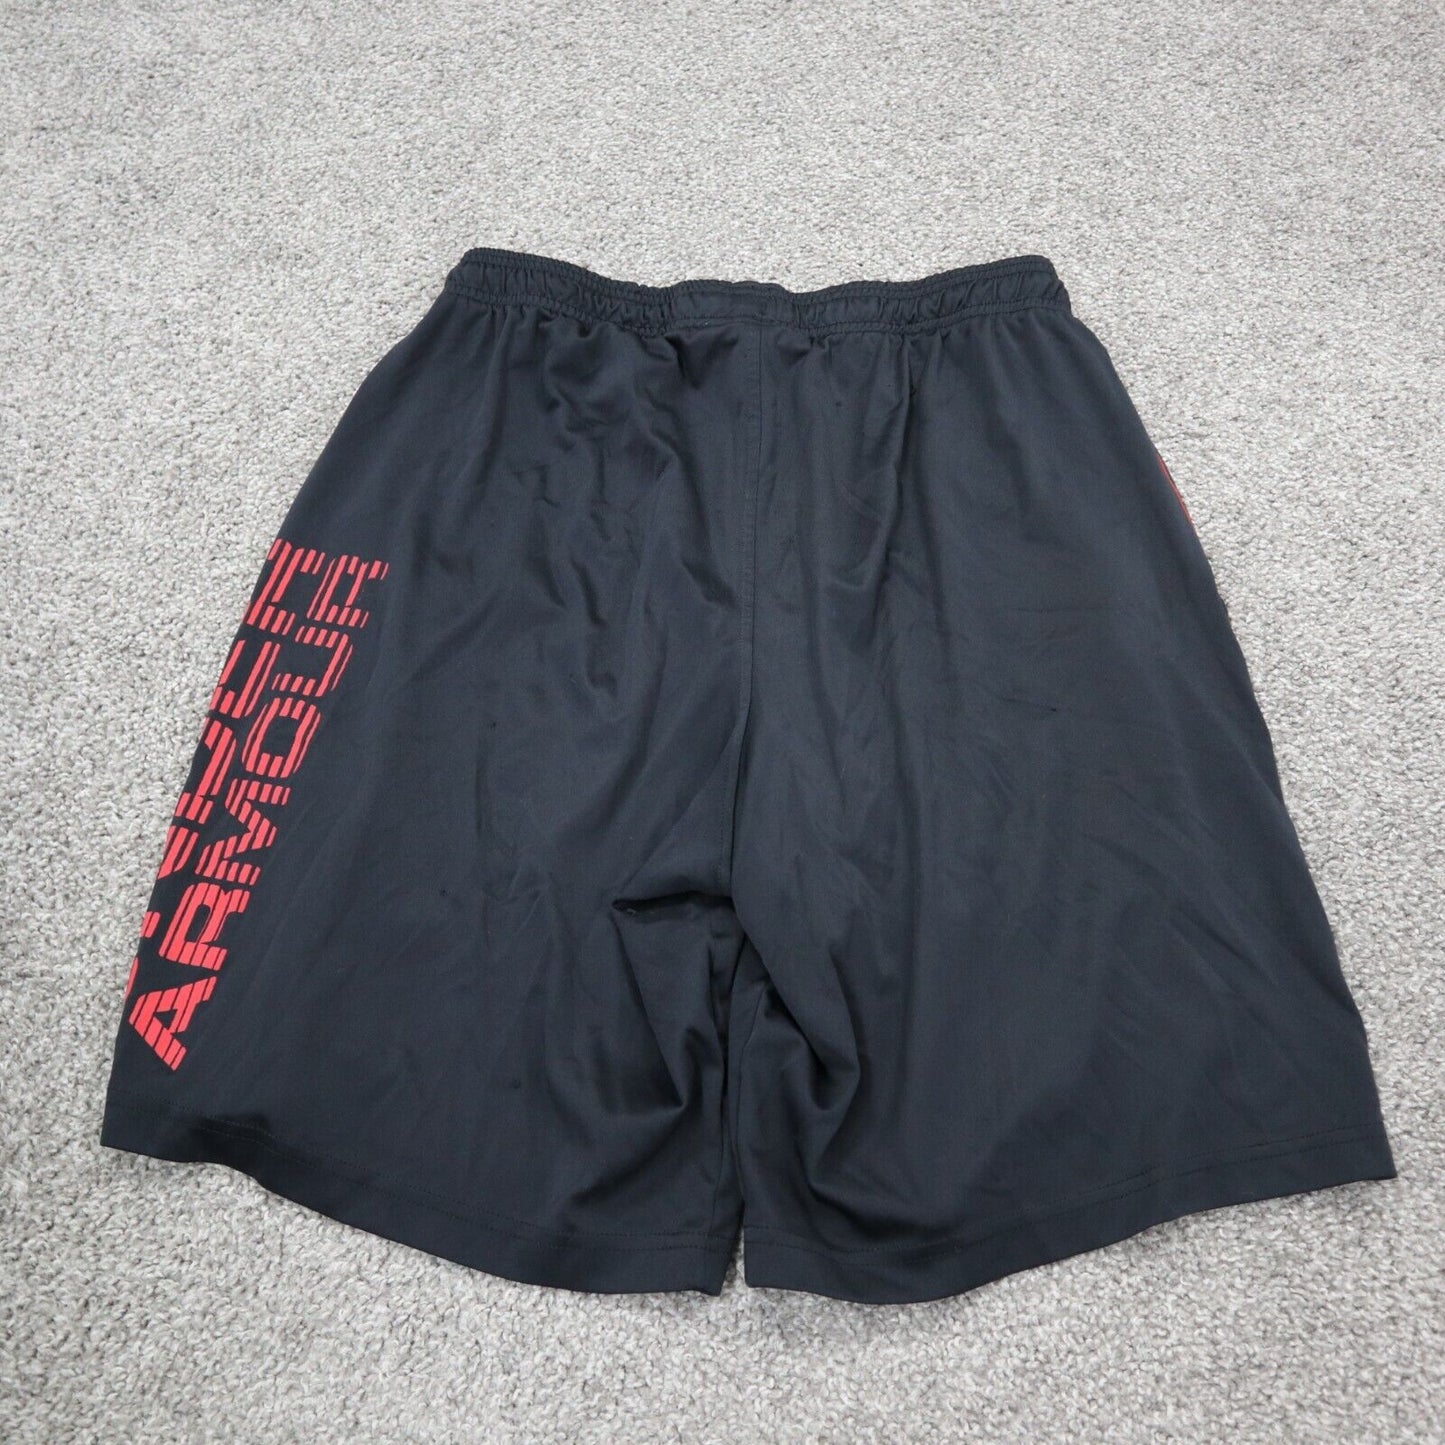 Under Armour Mens Athletic Shorts Loose Fit Elastic Waist Logo Black Size MD